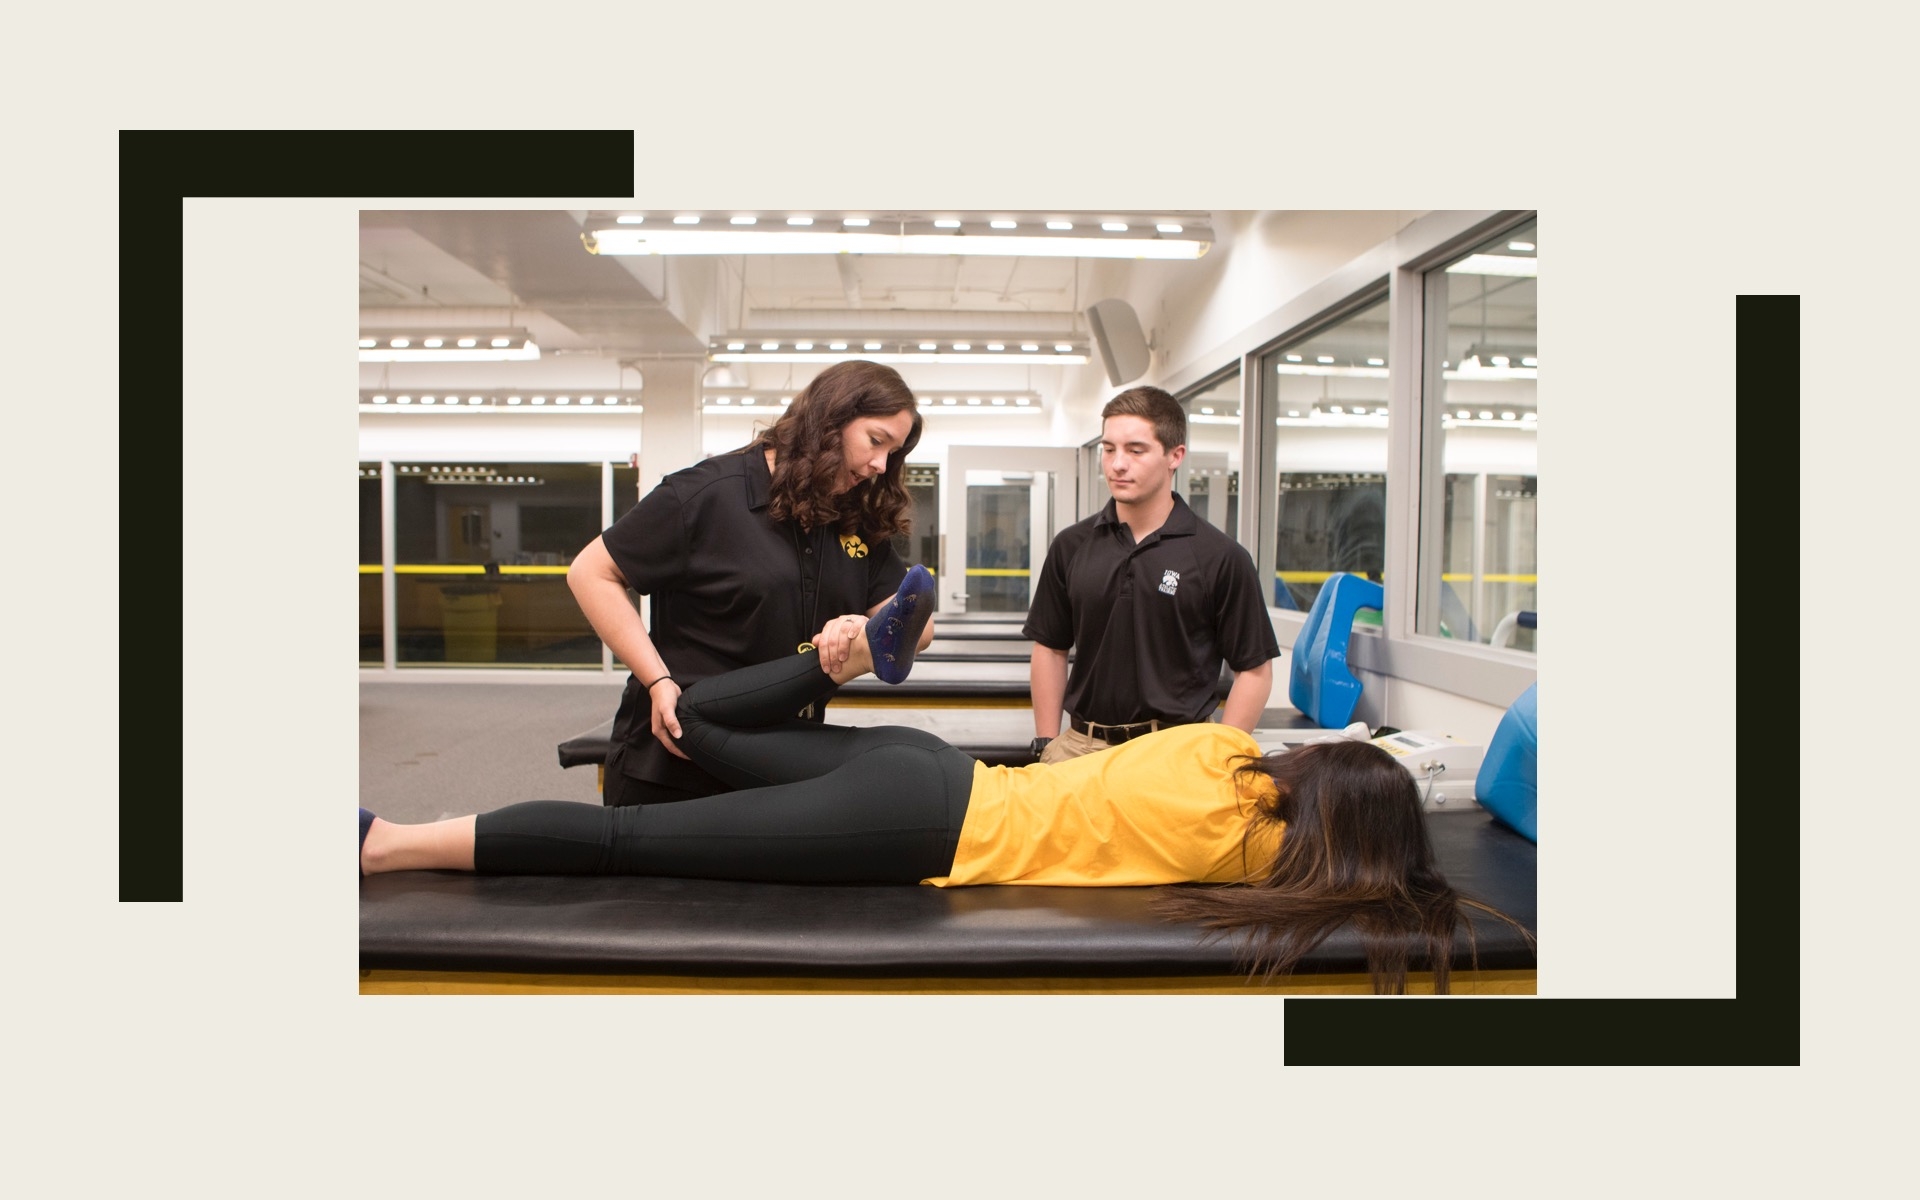 Faculty demonstrating a supine quadricep stretch to a student